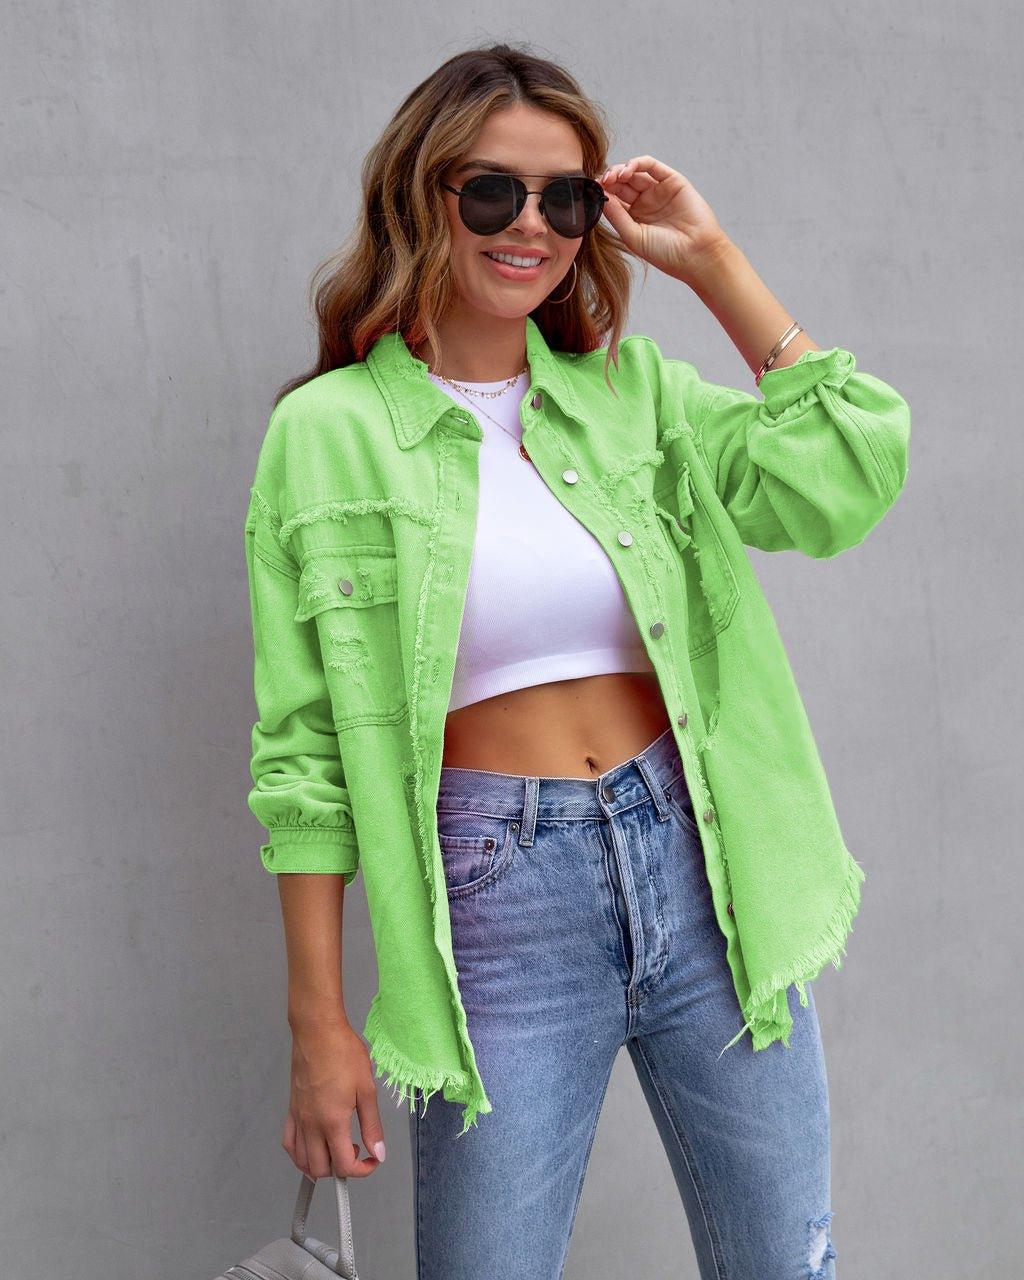 Fashion Ripped Shirt Jacket Female Autumn And Spring Casual Tops Womens Clothing - Comfortably chic